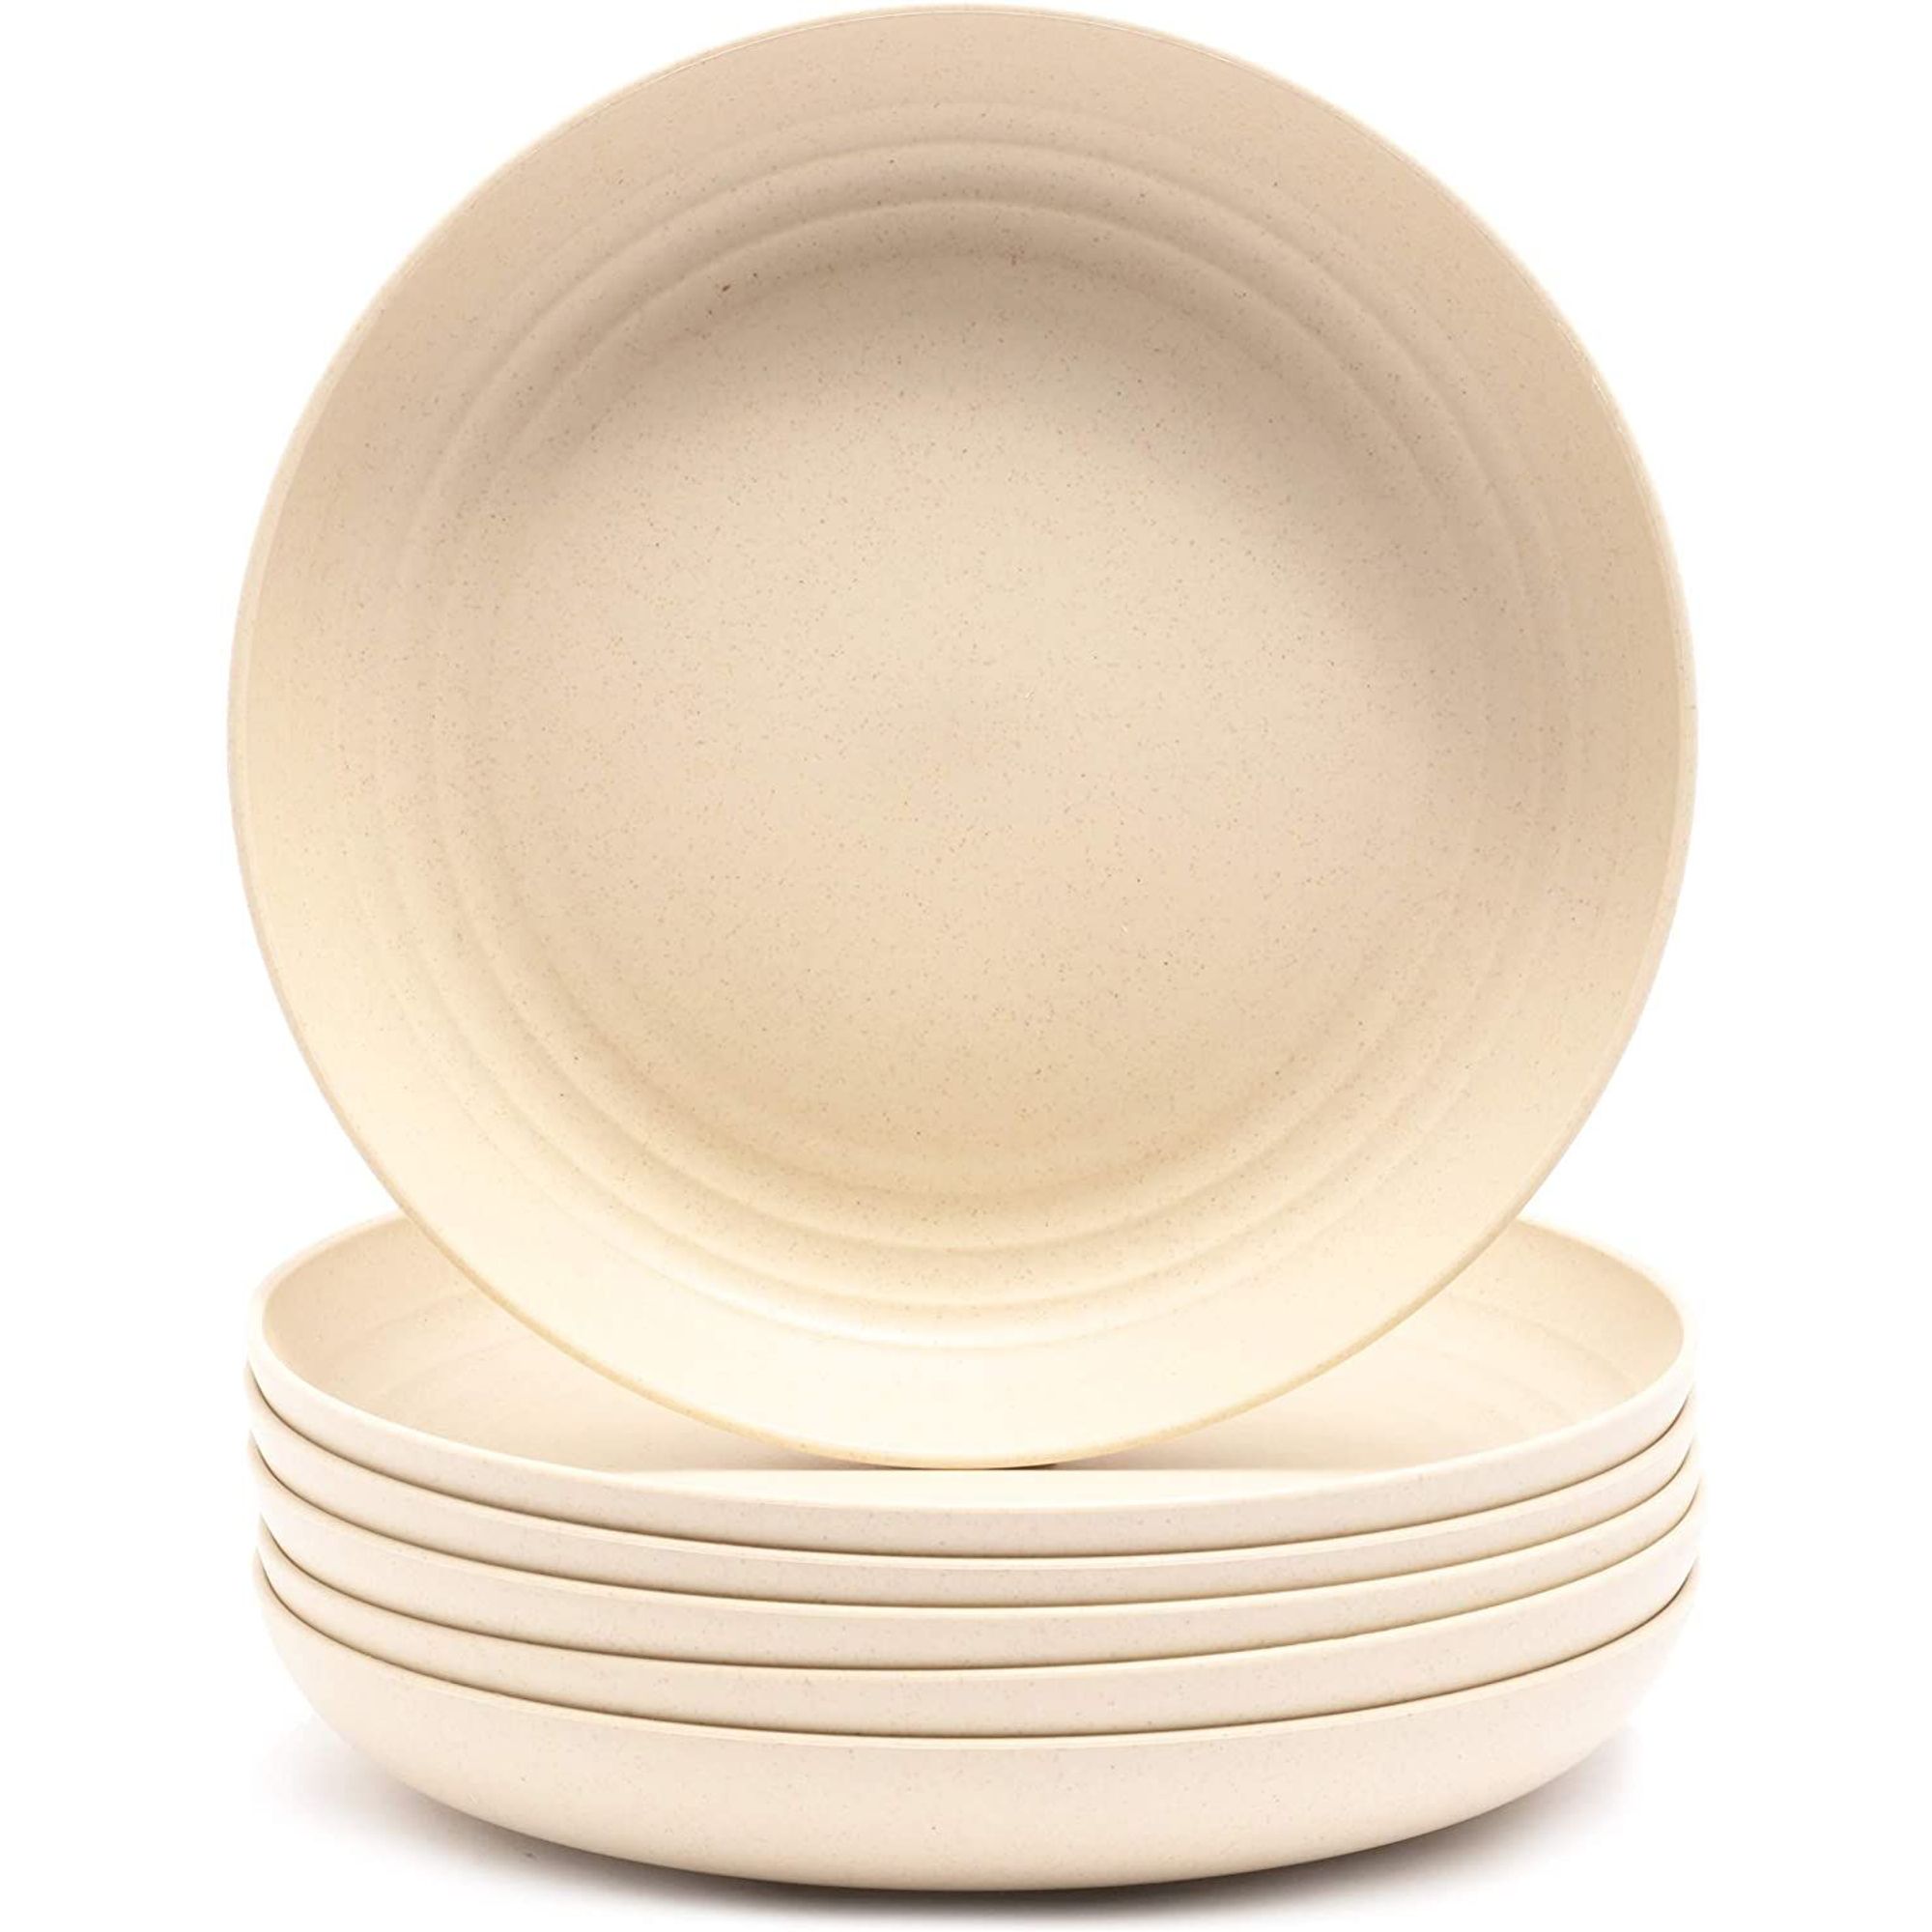 Anti-Fallen Beige 7.8 Unbreakable Dinner Plate for Baby Kids 4 Pcs Lightweight Wheat Straw Plates Toddler Dishwasher Microwave Safe Plates